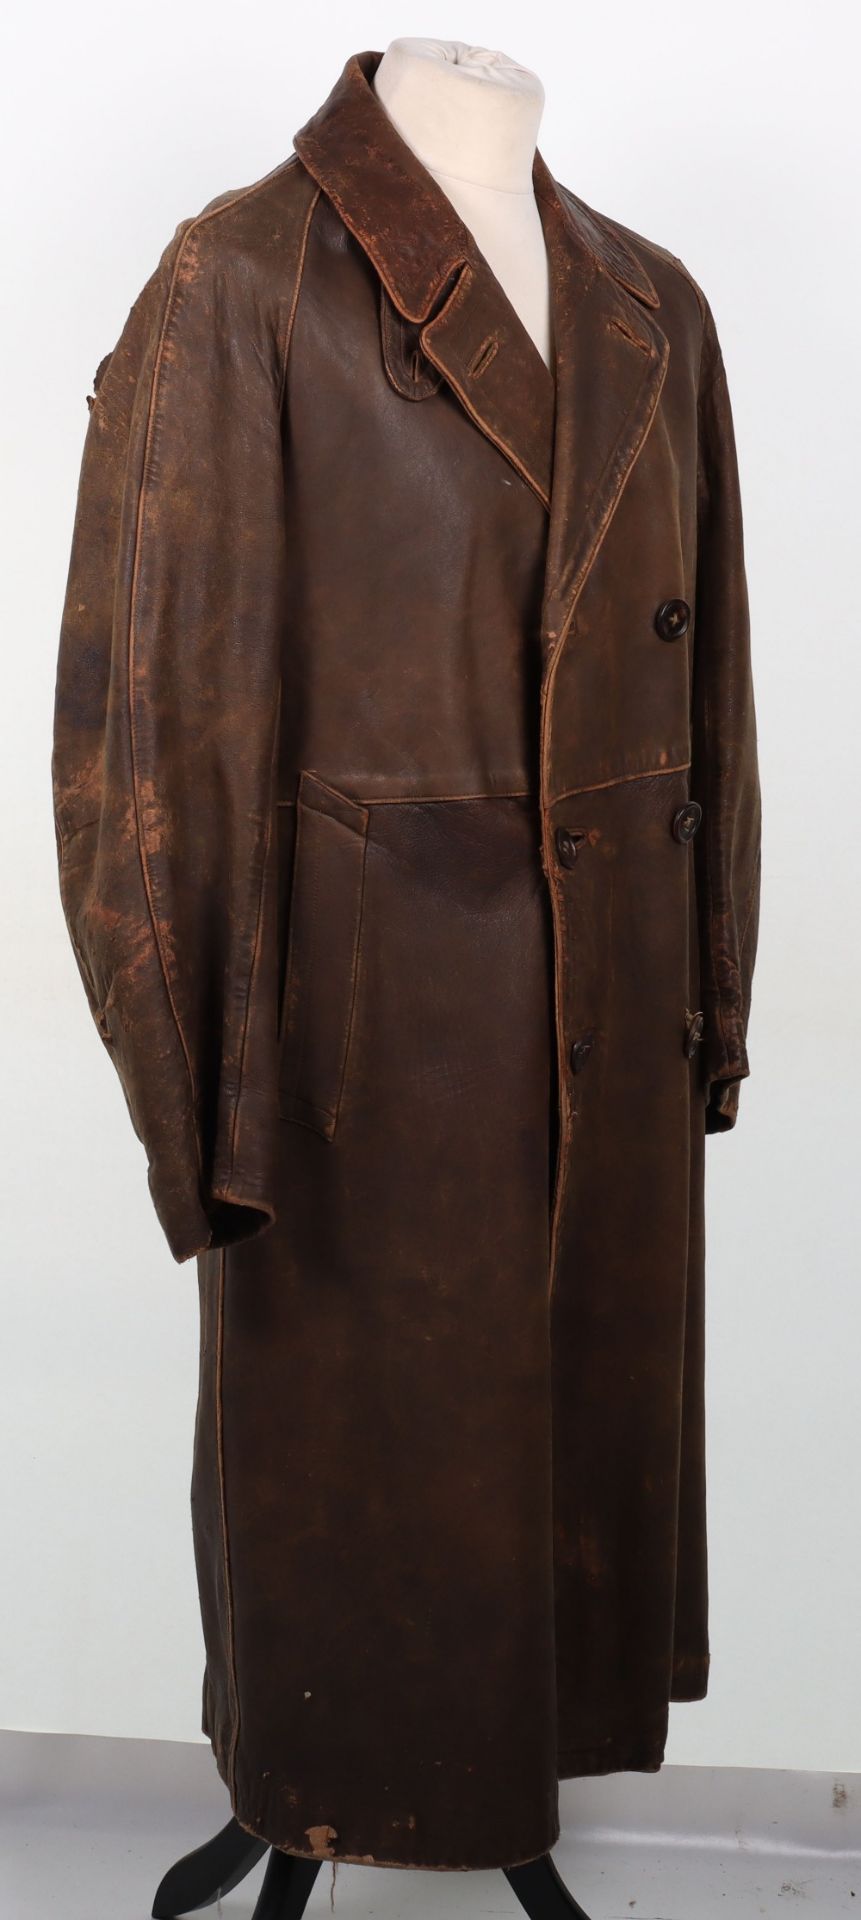 Early 20th Century Leather Aviators / Motoring Coat - Image 4 of 9